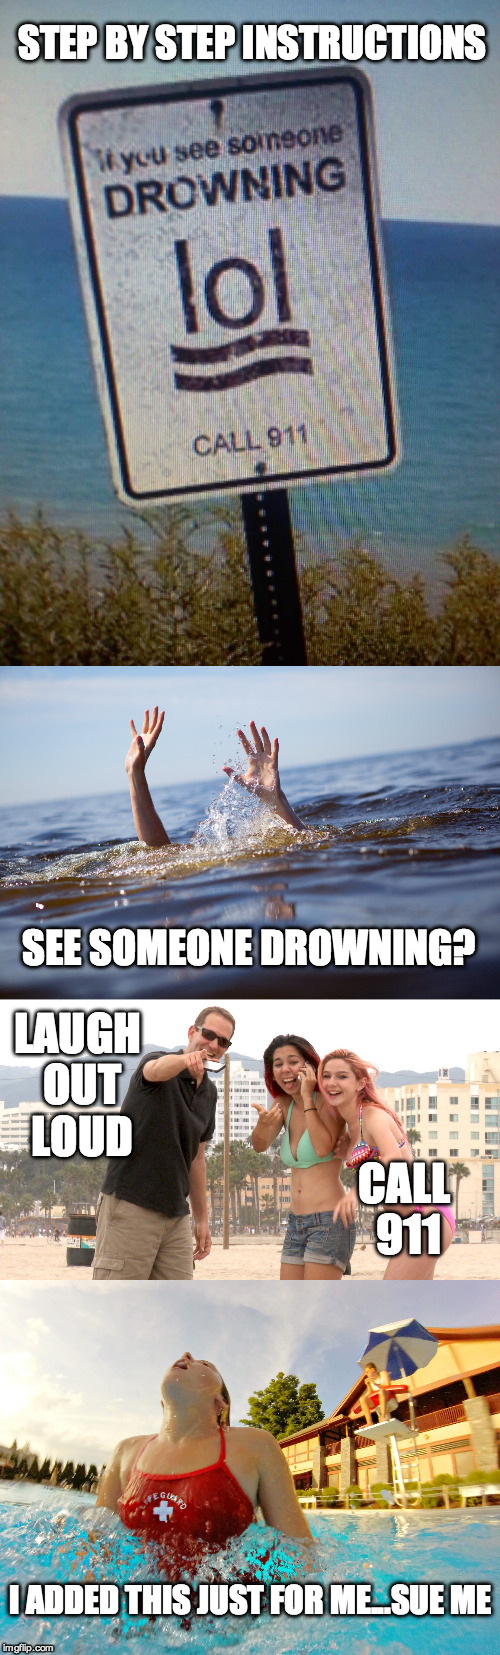 Poor design even though it is amusing | STEP BY STEP INSTRUCTIONS; LAUGH OUT LOUD; SEE SOMEONE DROWNING? CALL 911; I ADDED THIS JUST FOR ME...SUE ME | image tagged in drown,lol,funny sign,911 | made w/ Imgflip meme maker